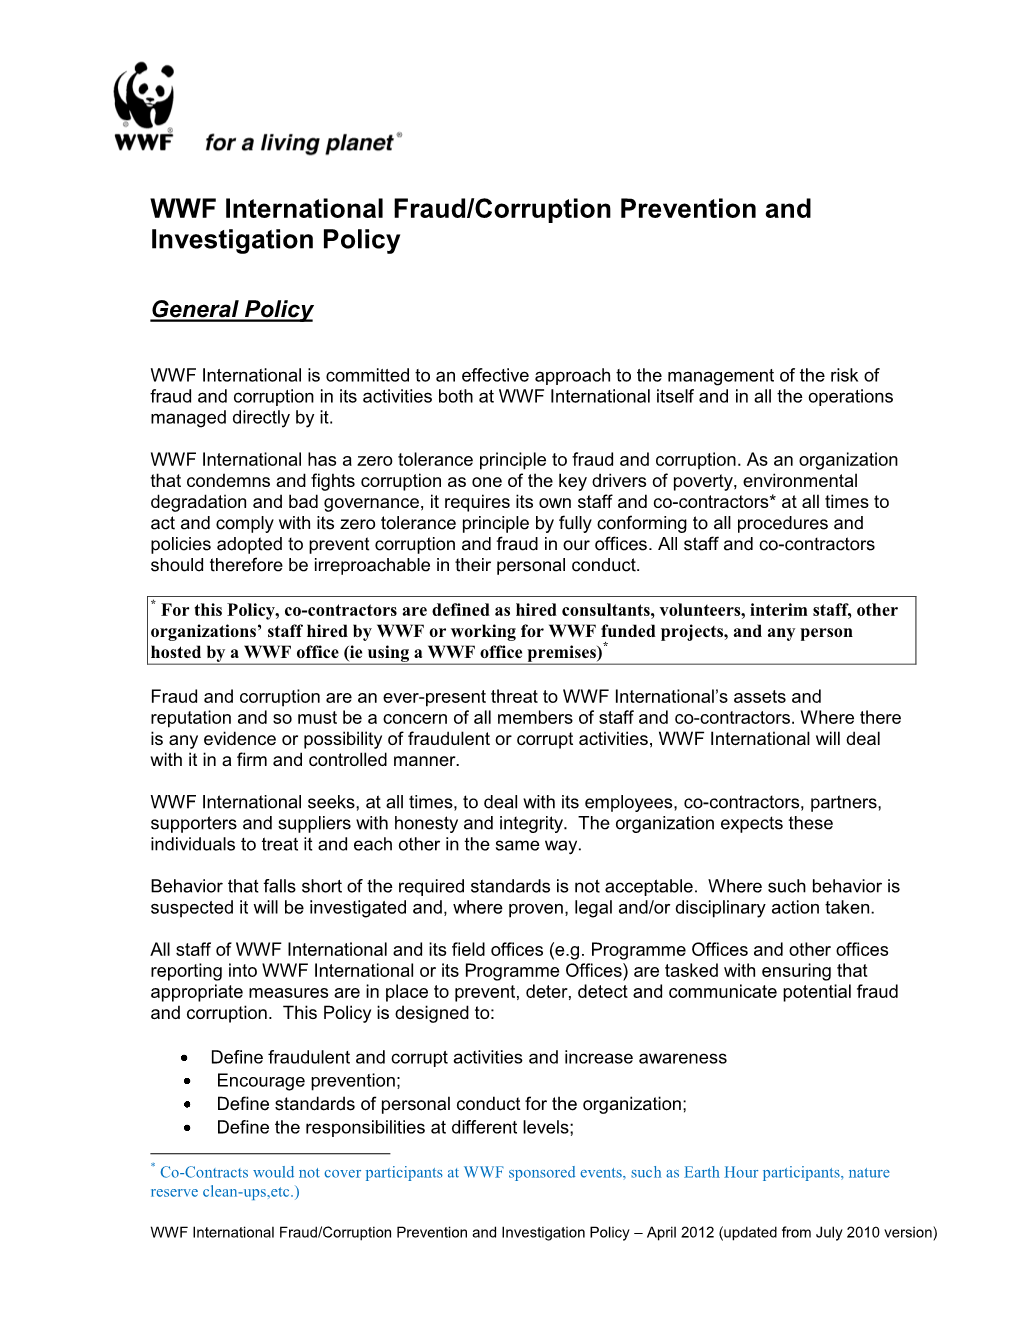 WWF International Fraud/Corruption Prevention and Investigation Policy